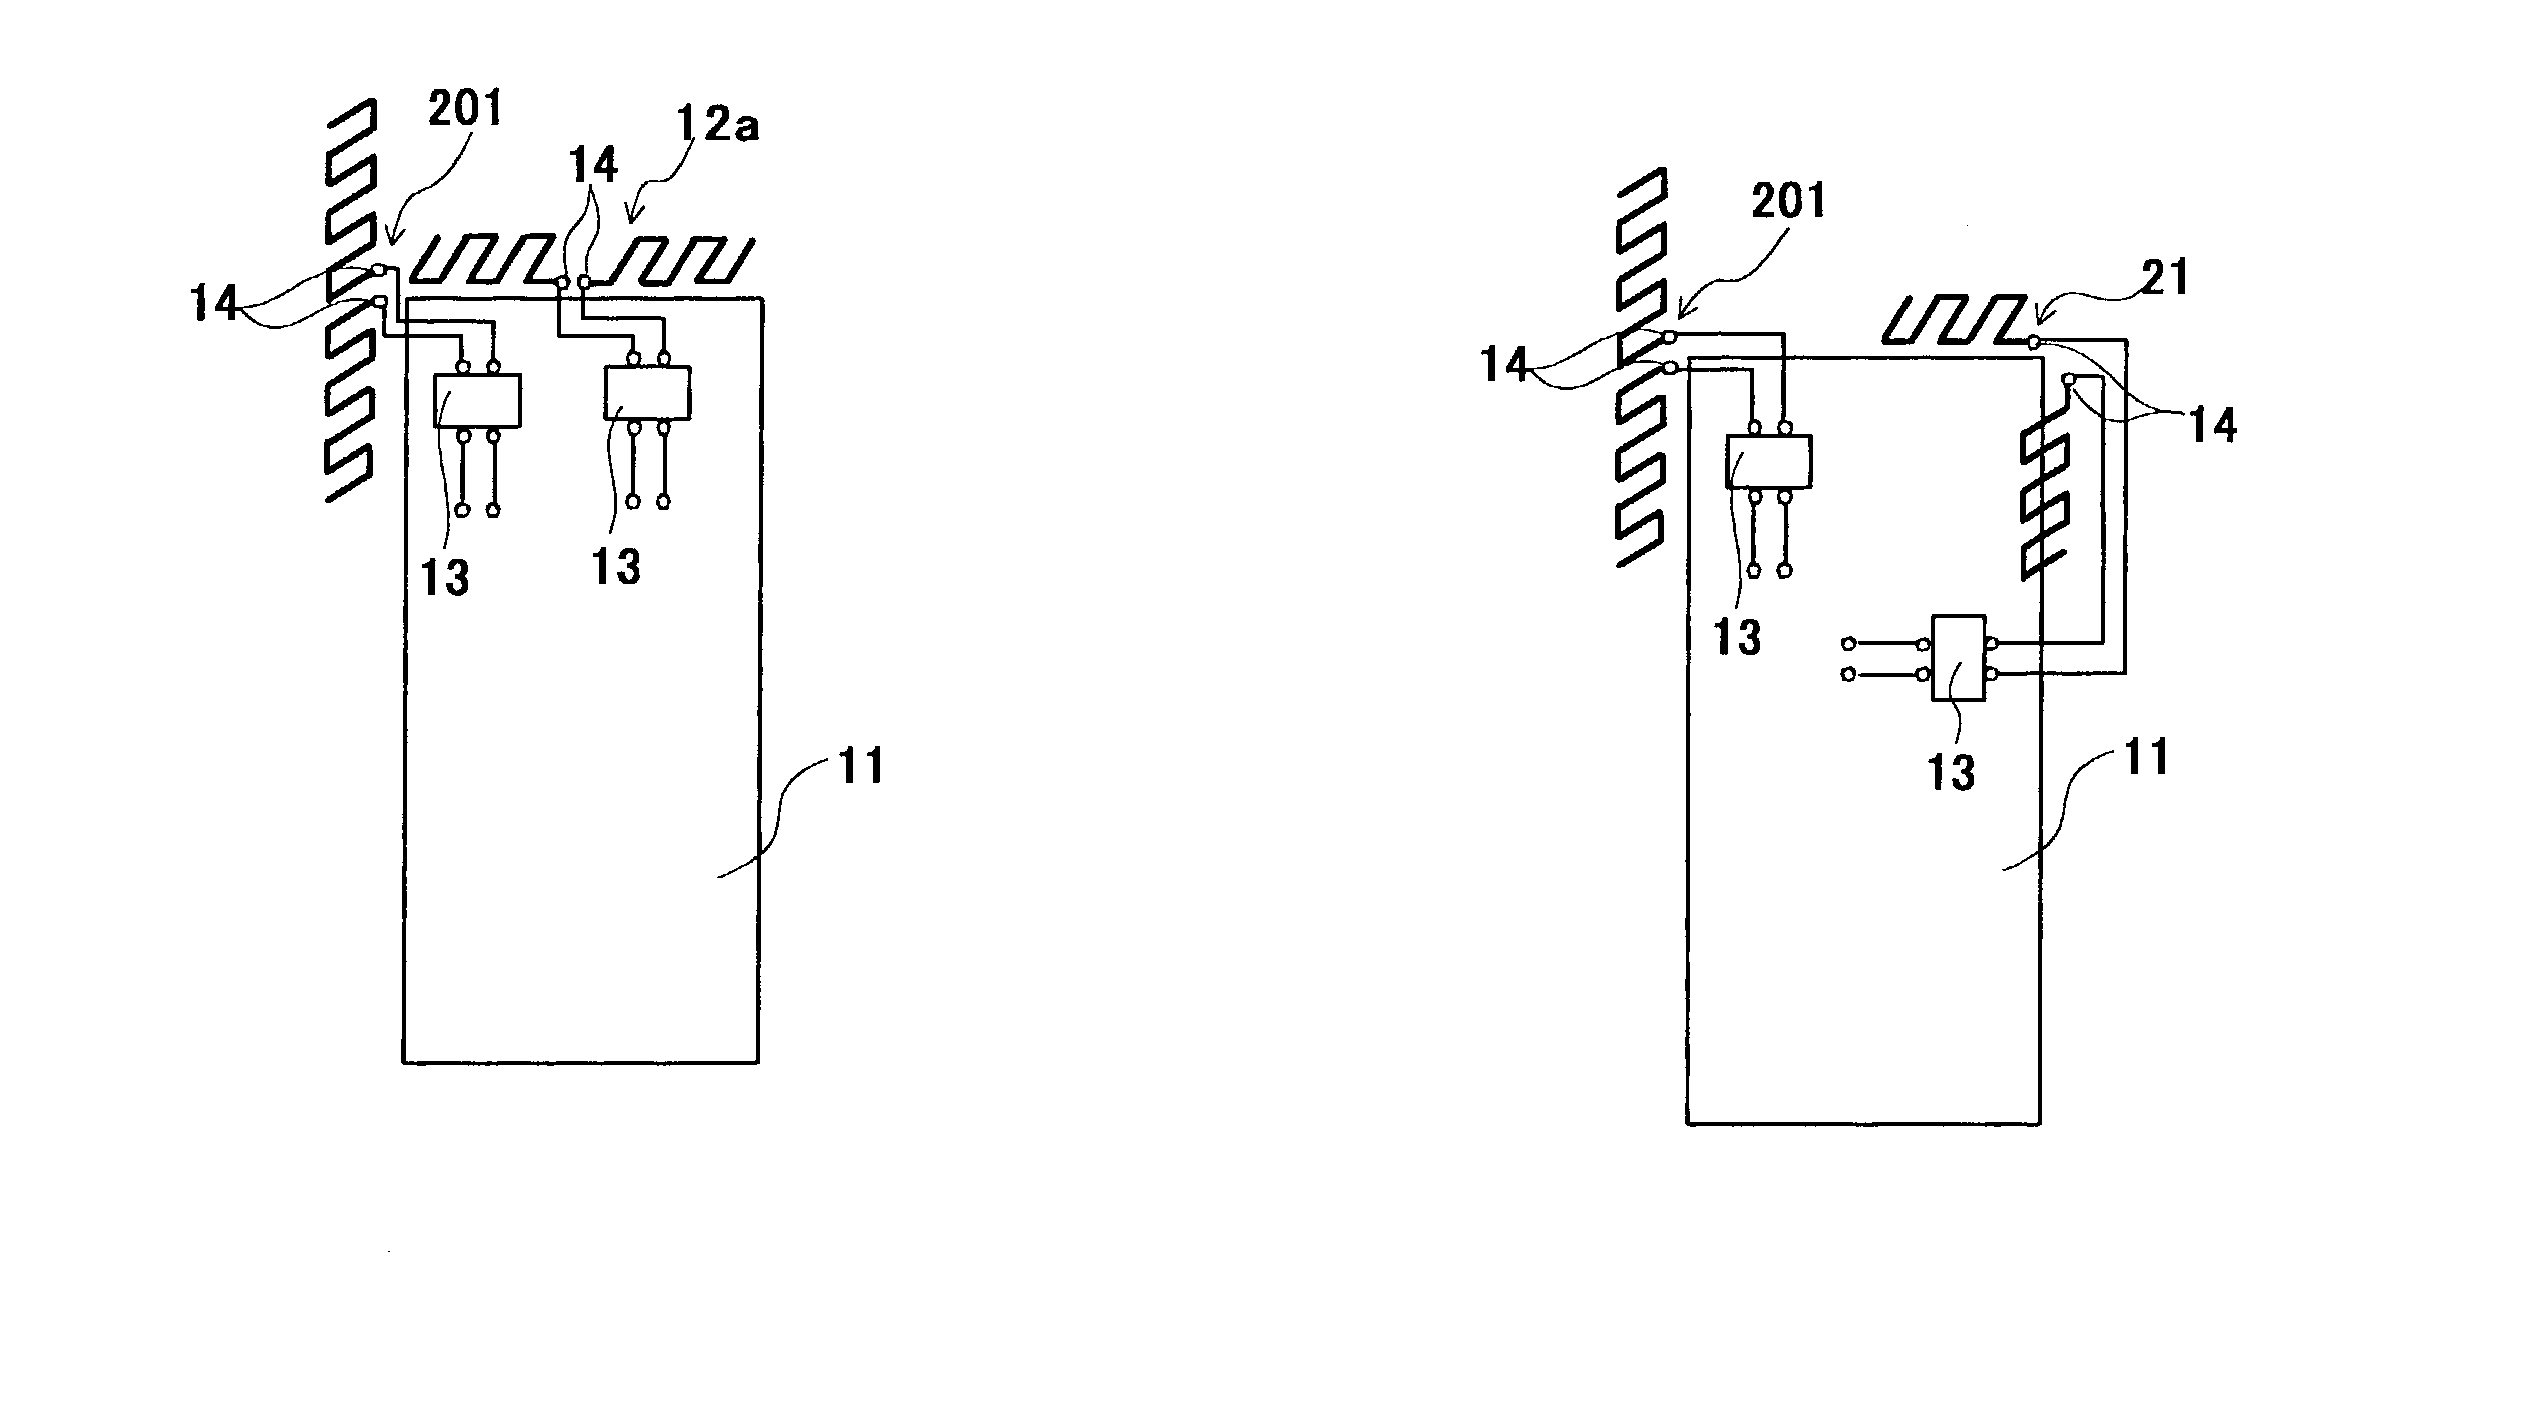 Built-in antenna for radio communication terminal